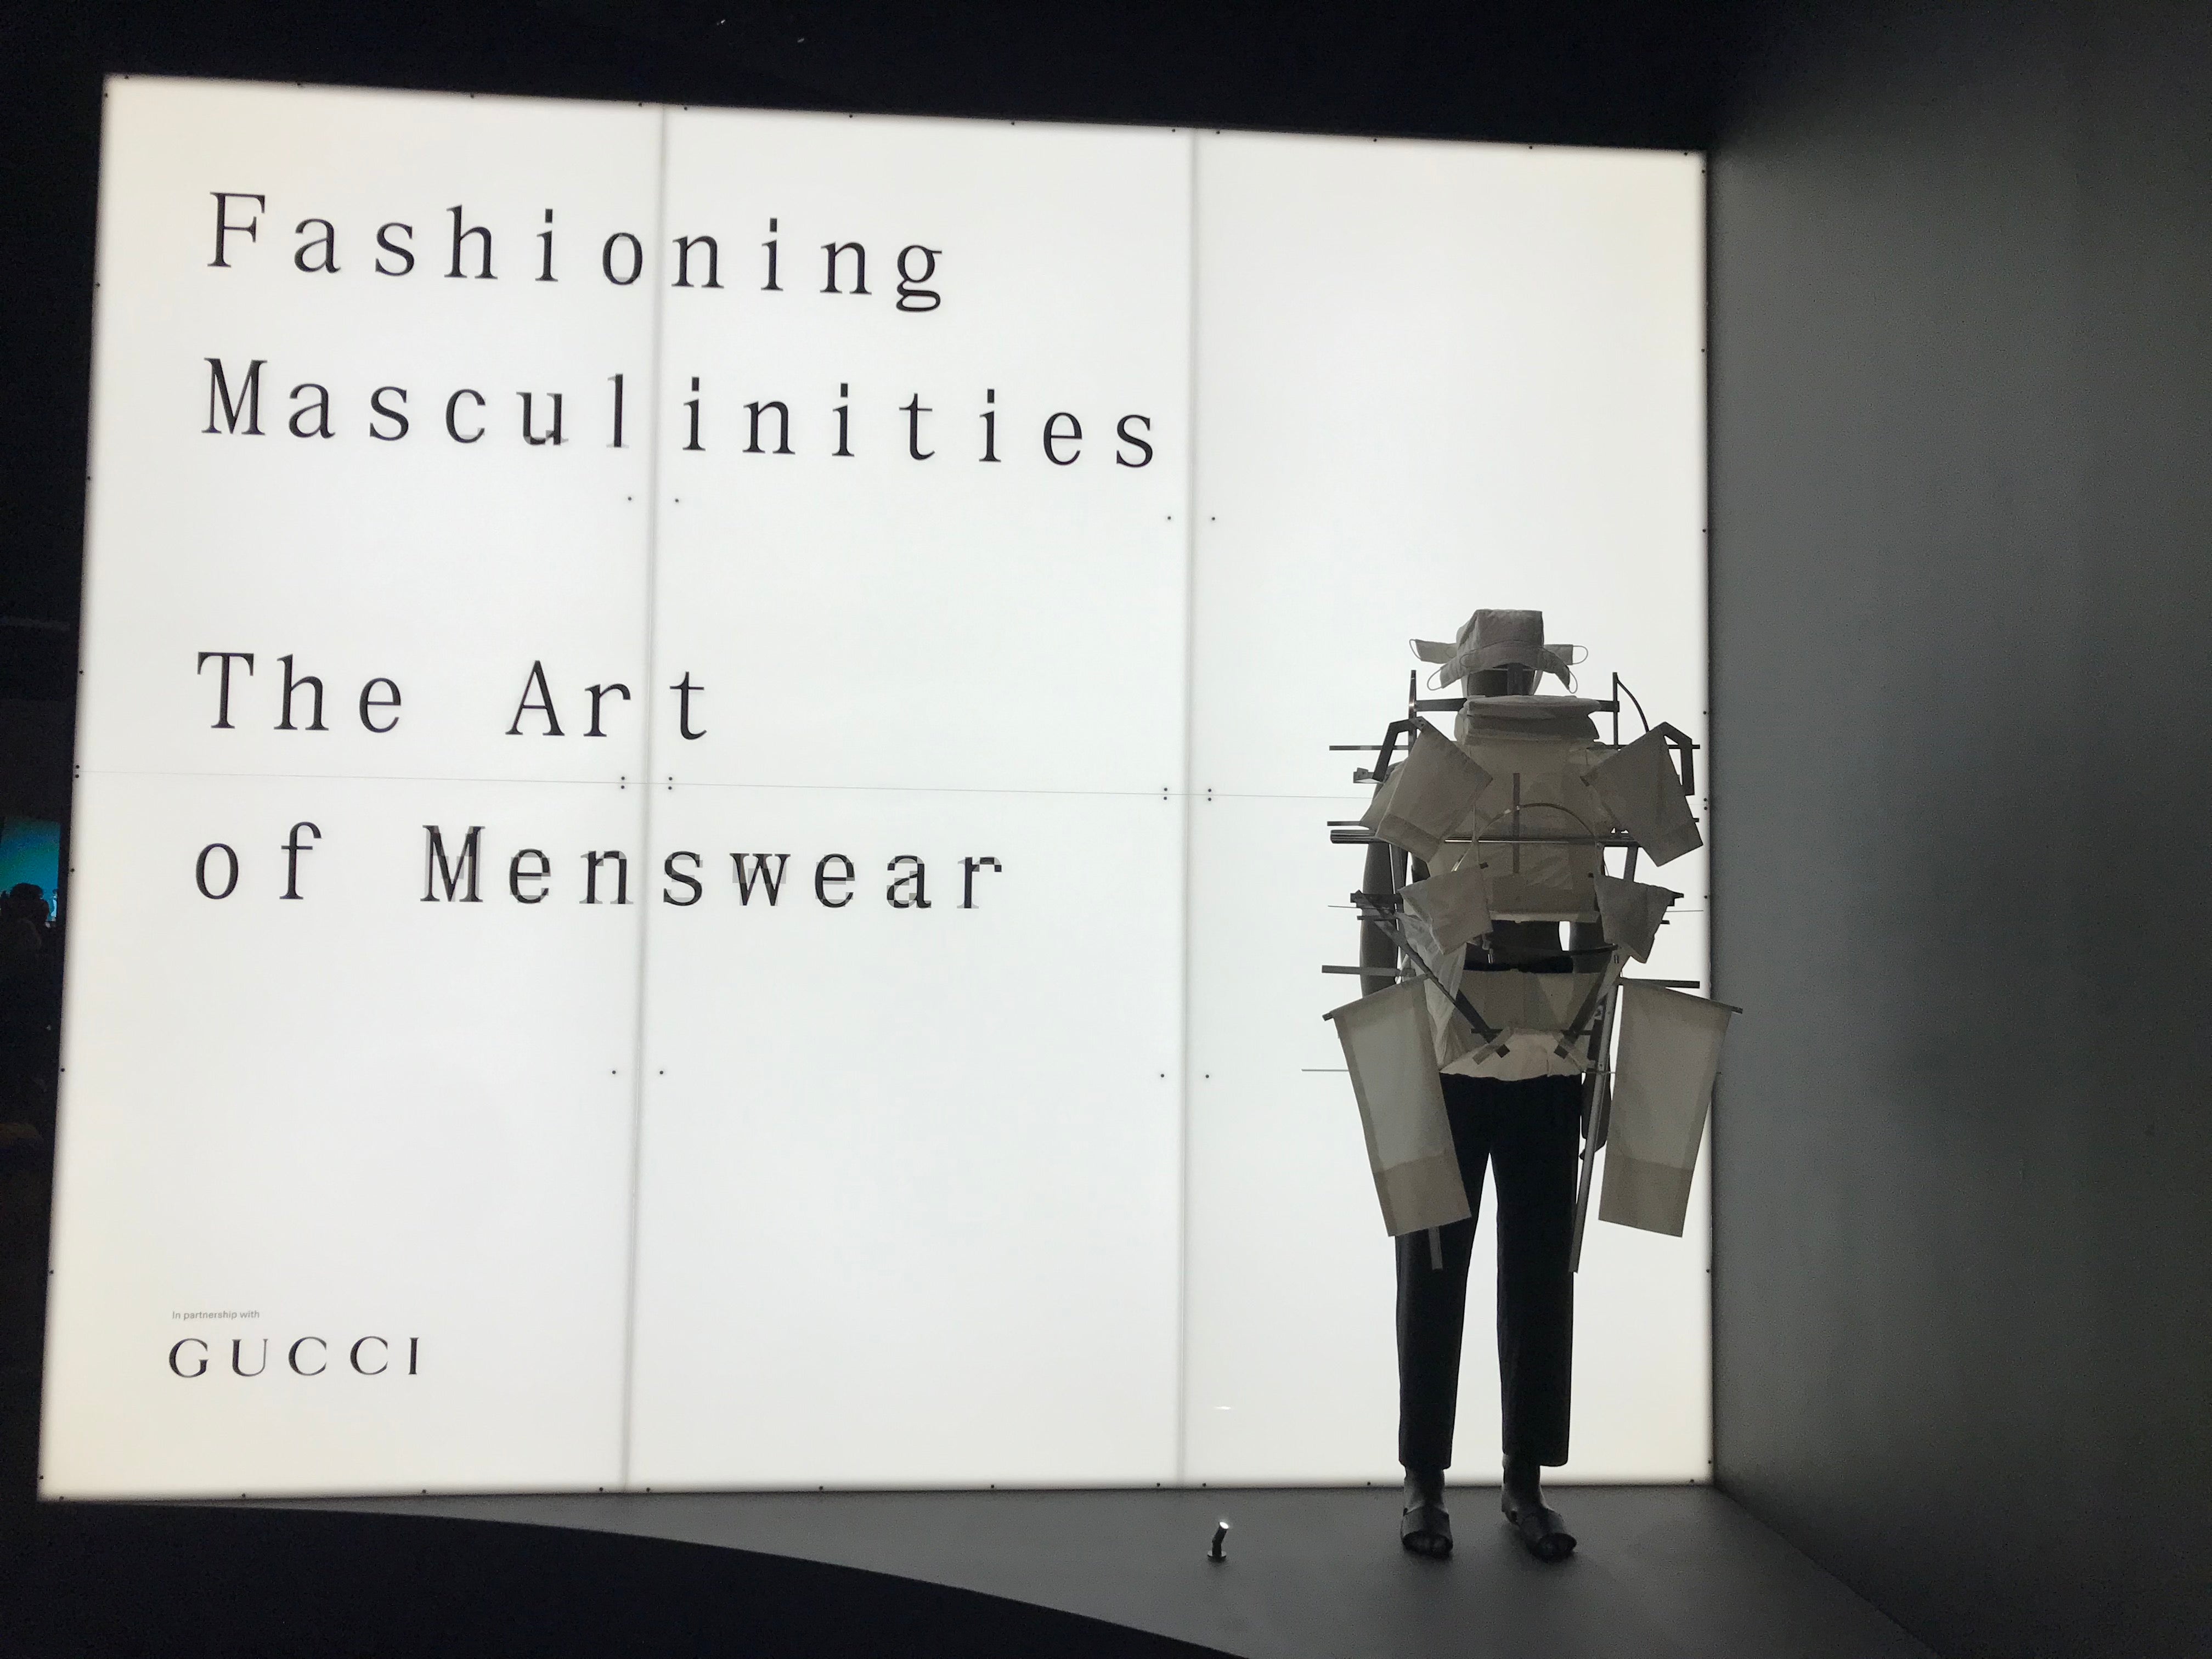 Fashioning Masculinities: The Art of Menswear at the V&A